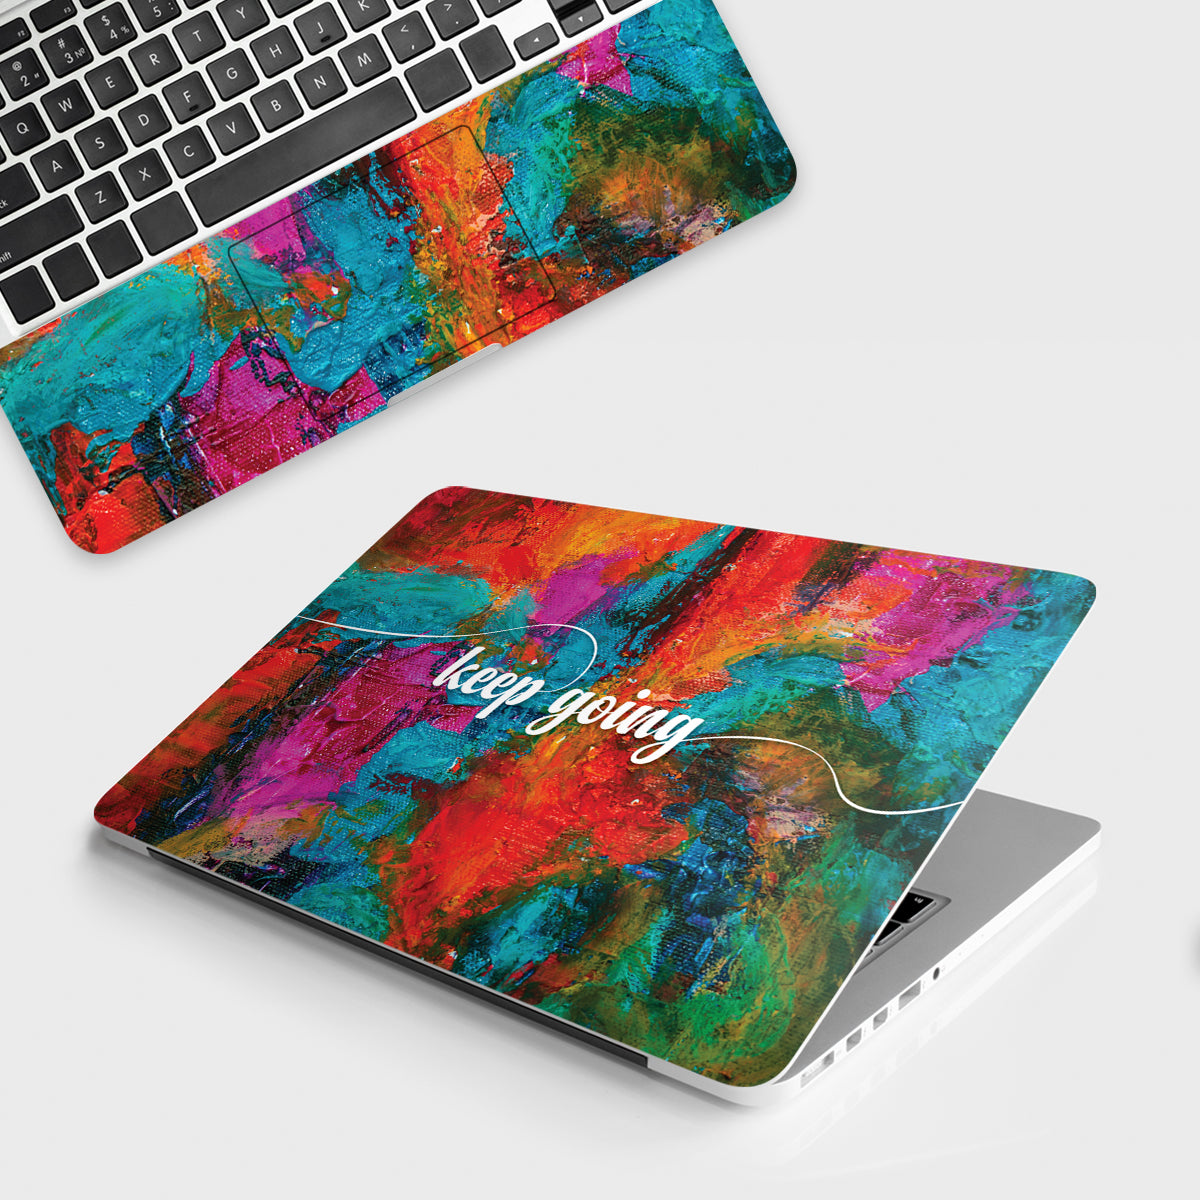 Fomo Store Laptop Skins Abstract Keep Going